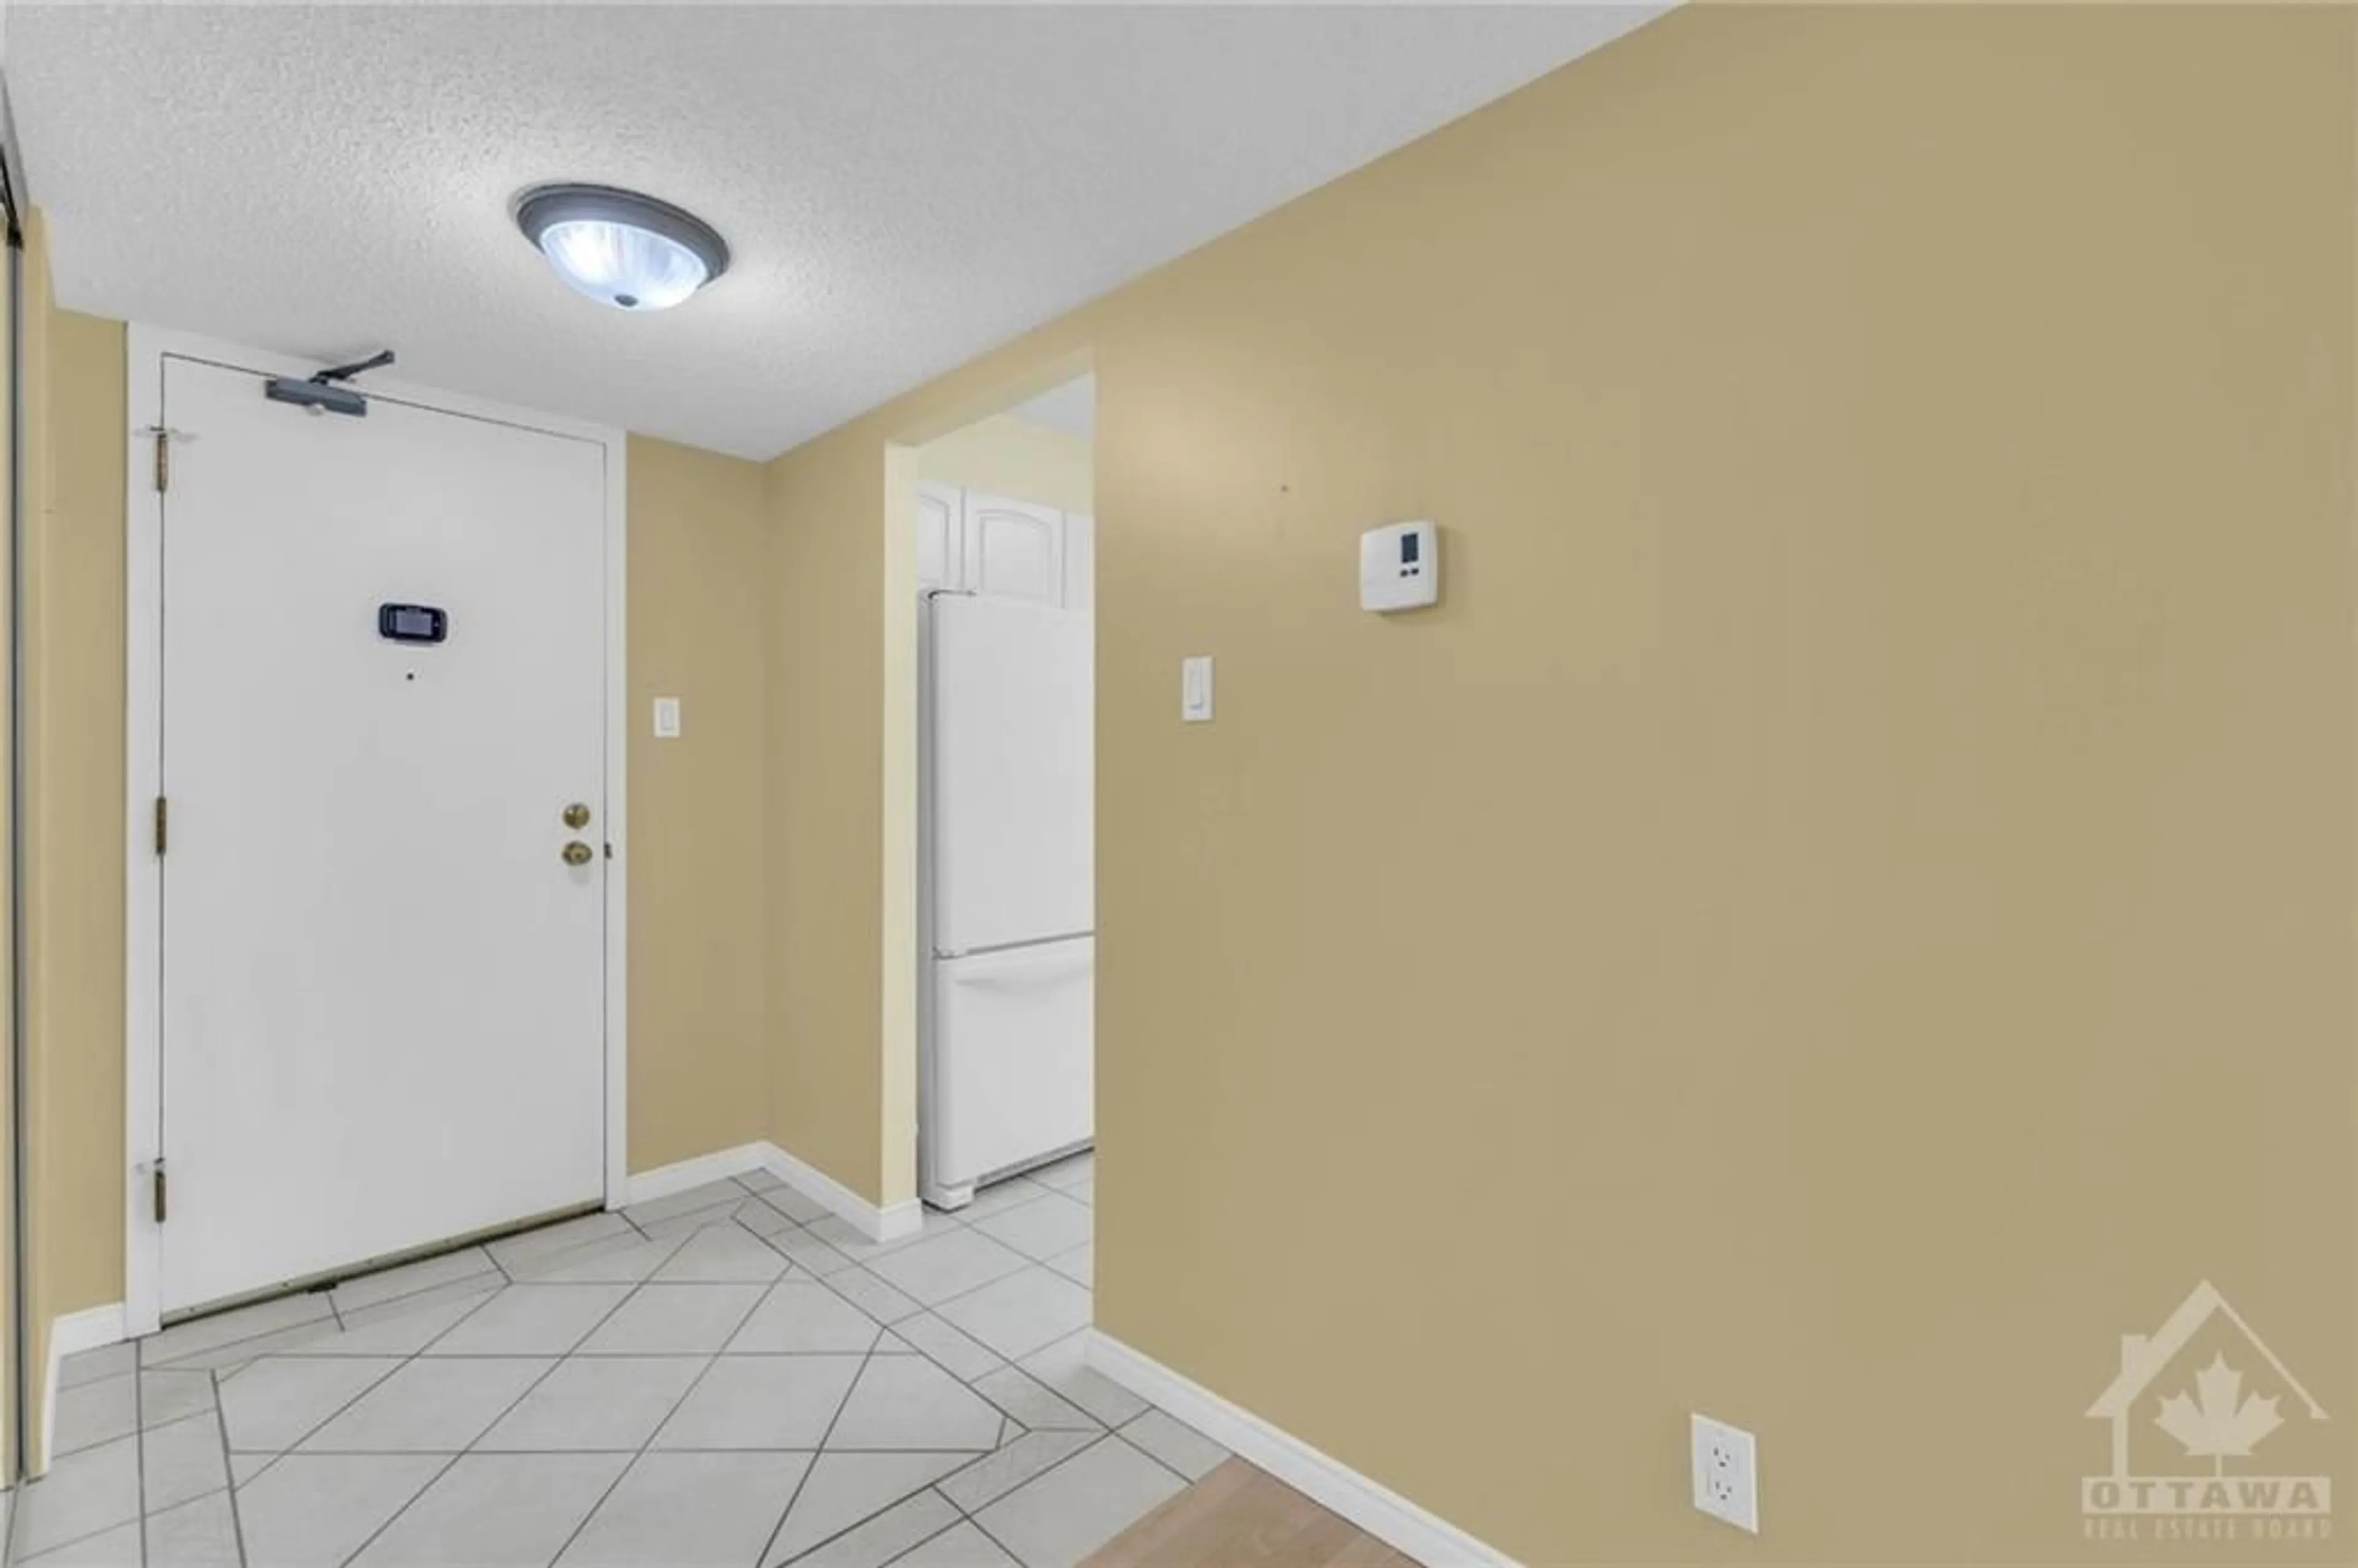 Indoor foyer for 200 LAFONTAINE Ave #605, Ottawa Ontario K1L 8K8